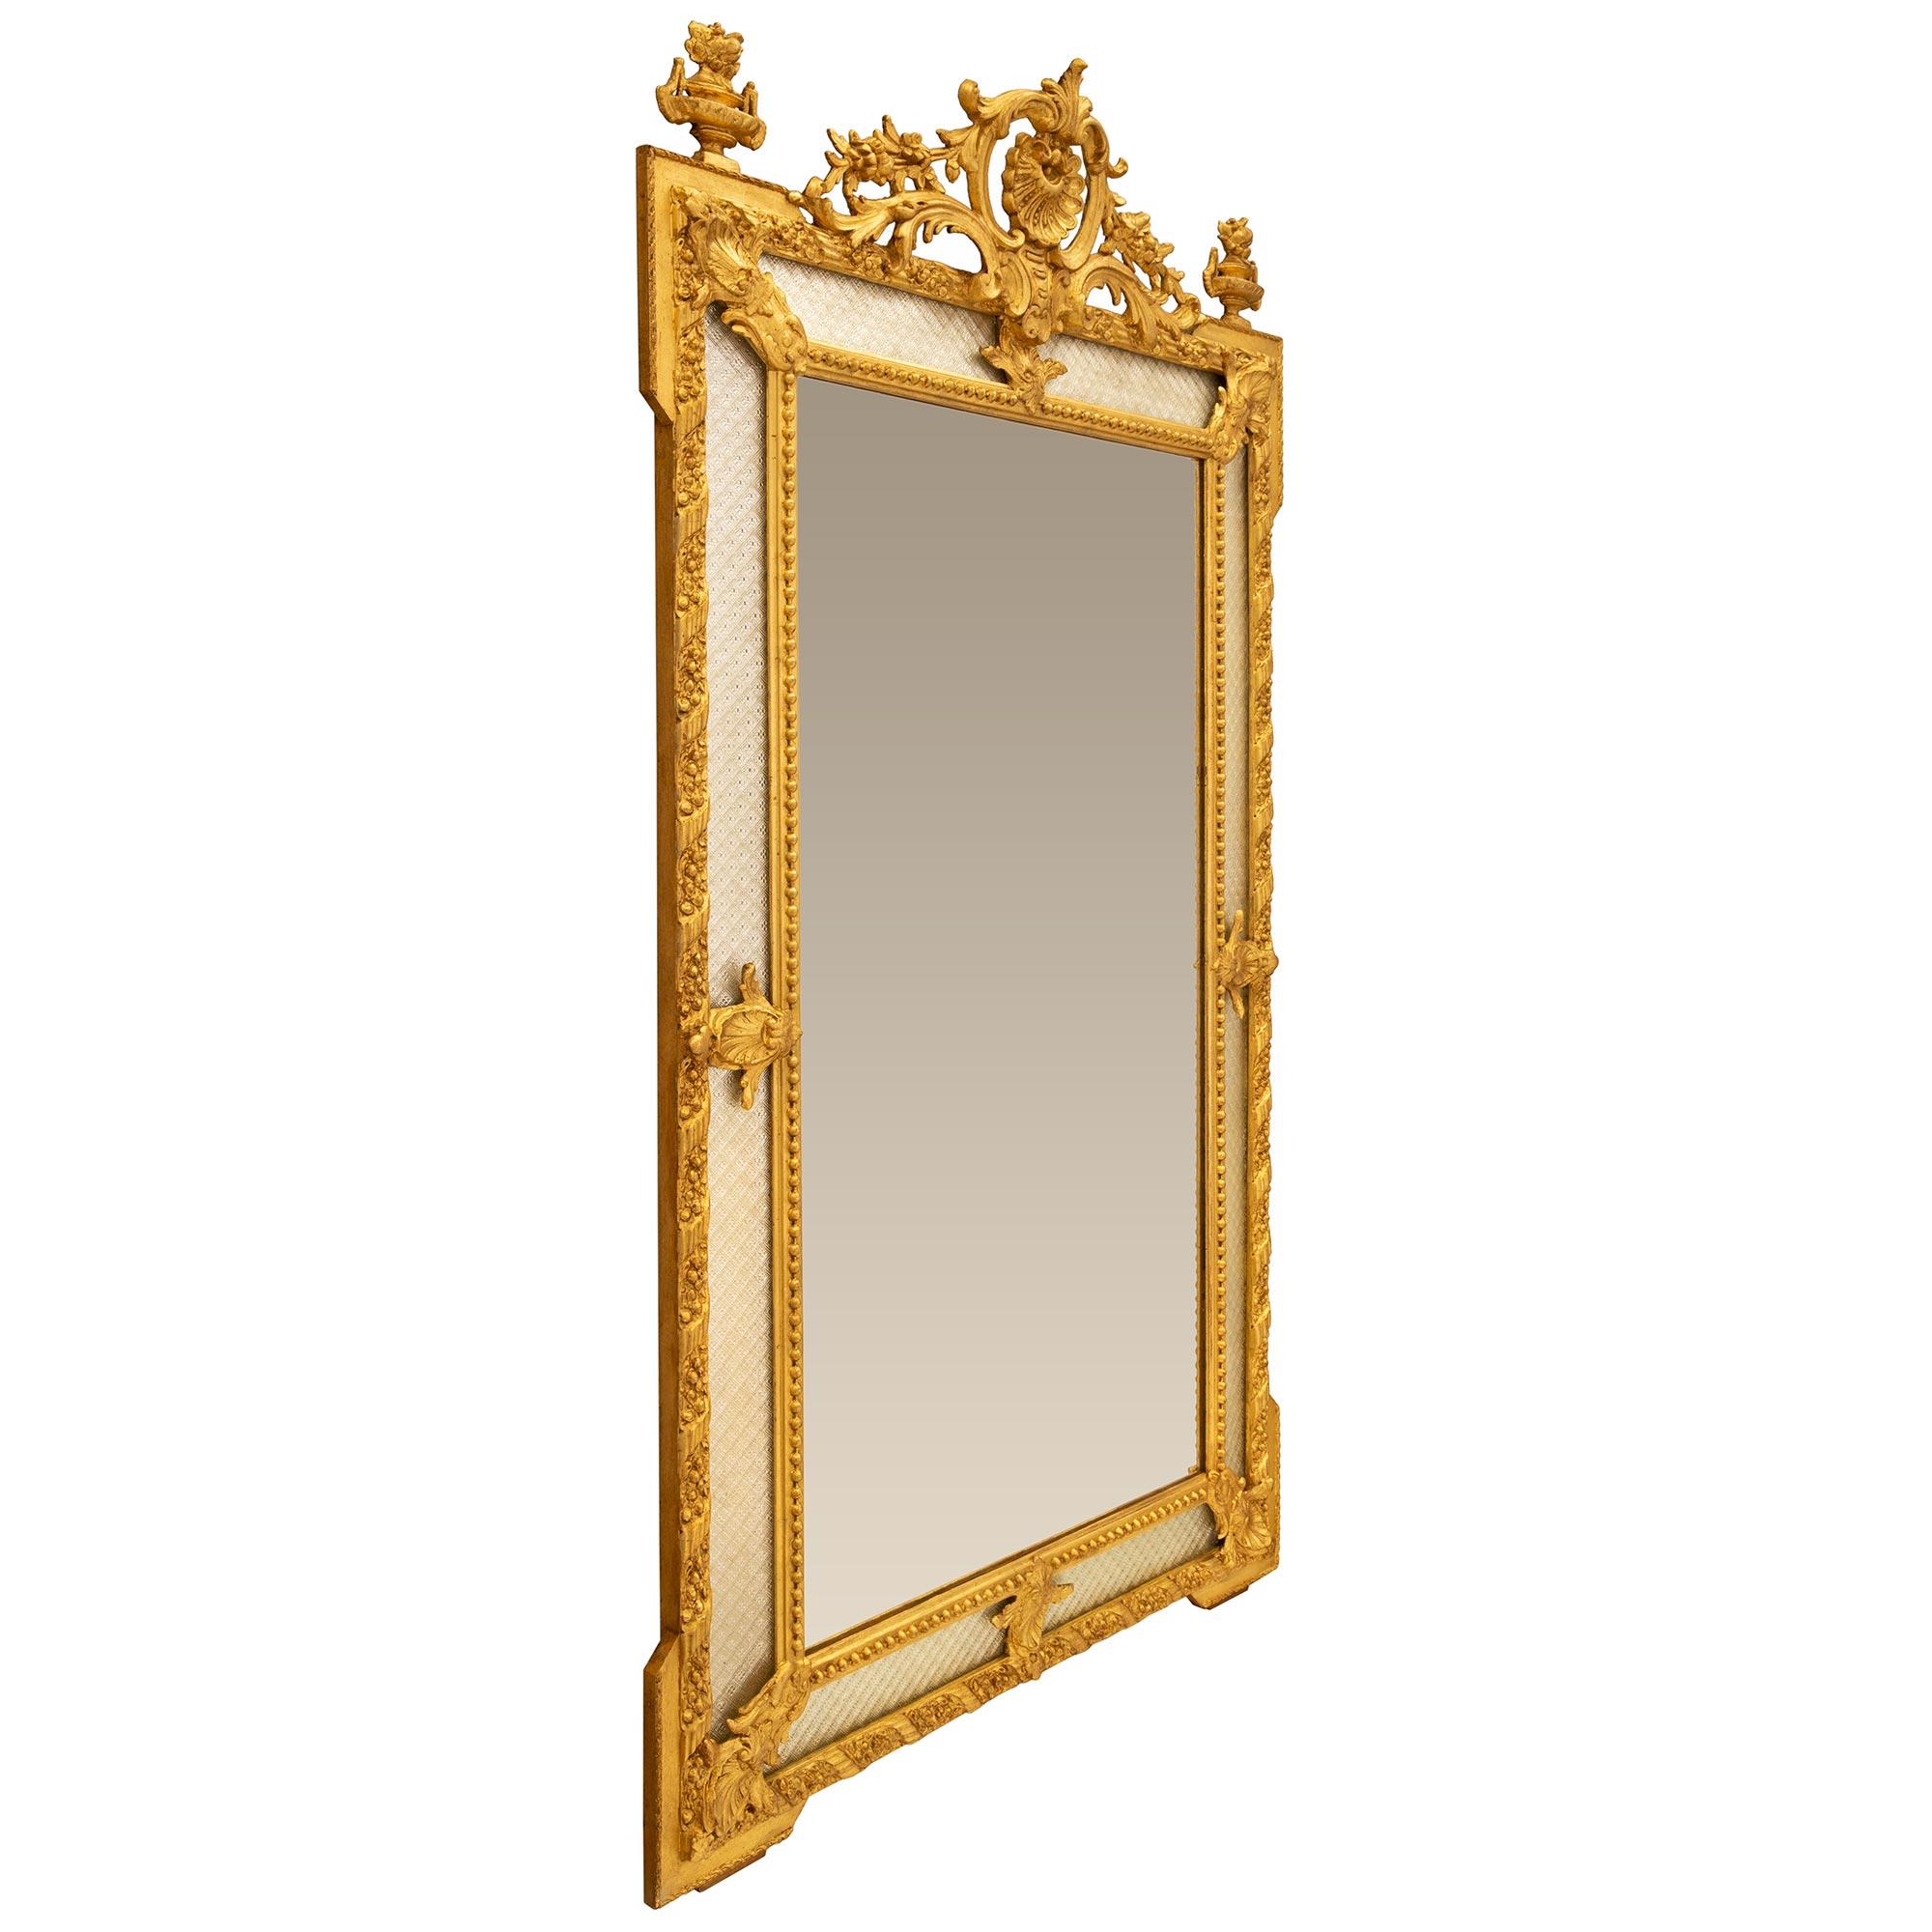 An exceptional and most elegant French 19th century Louis XVI st. giltwood double framed mirror. The mirror retains all of its original glass plates throughout with the central mirror plate framed within a charming beaded wrap around band. The outer